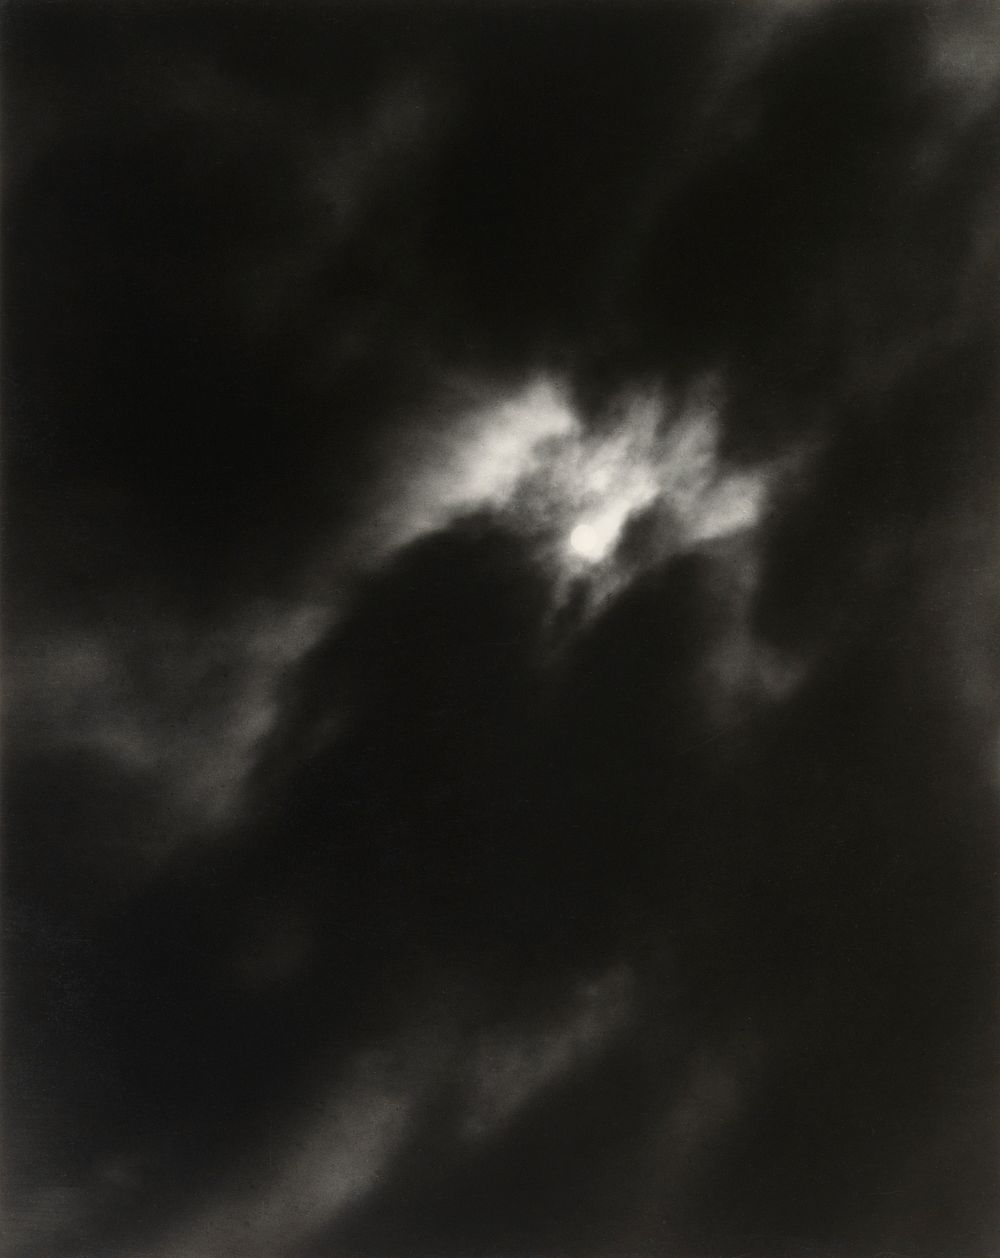 Equivalent (1926) photo in high resolution by Alfred Stieglitz. Original from the Getty. Digitally enhanced by rawpixel.